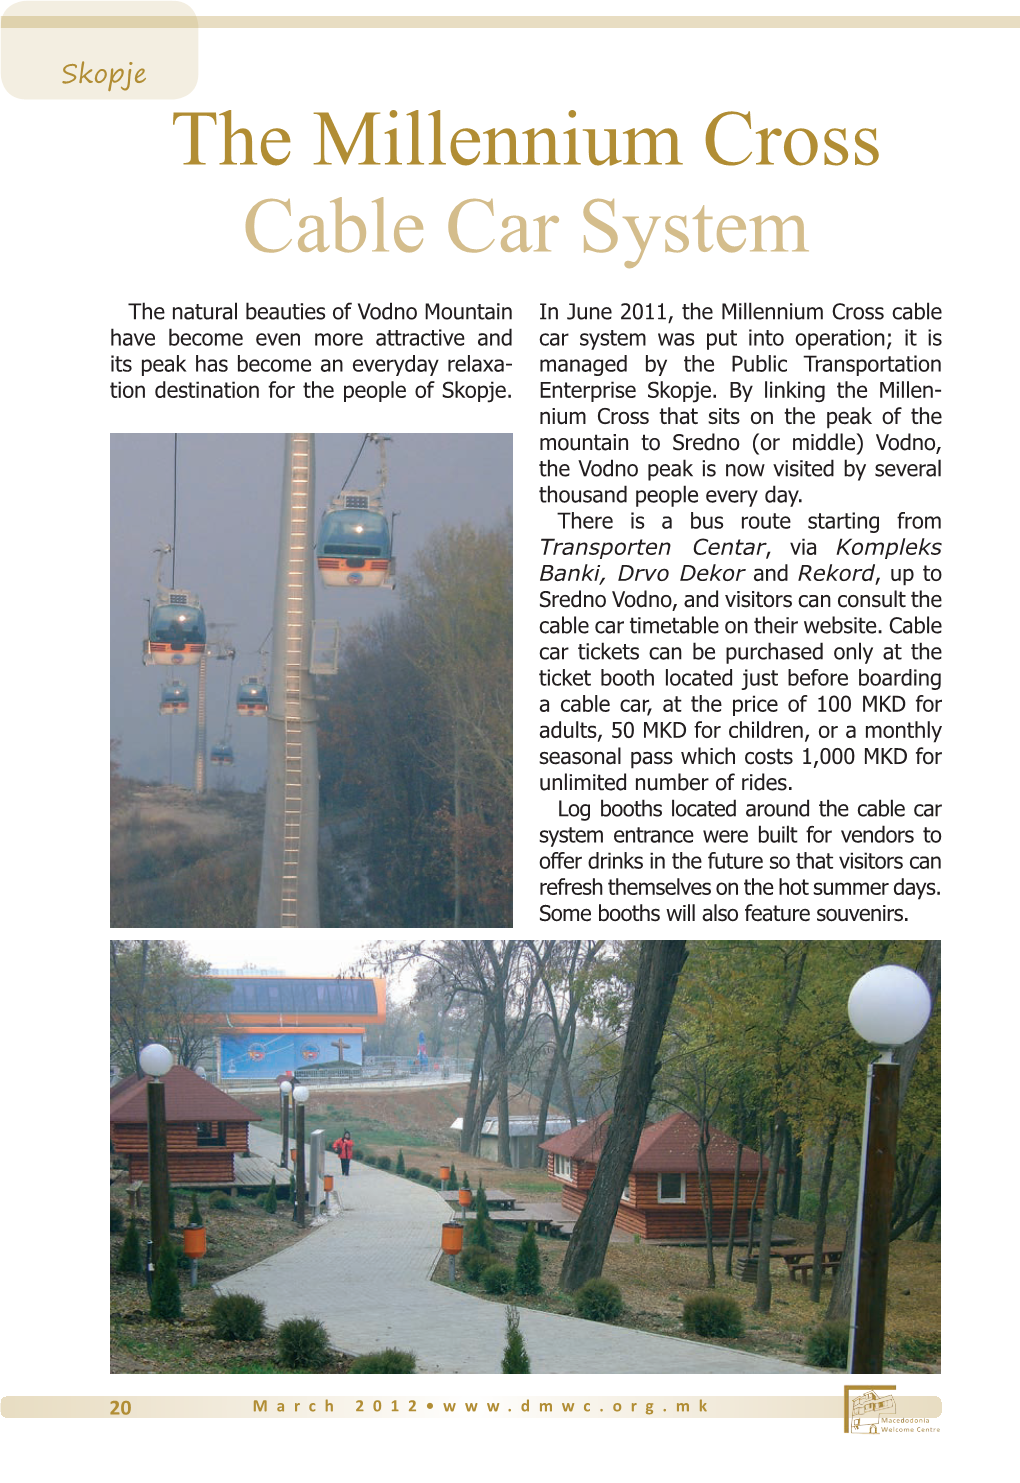 The Millennium Cross Cable Car System